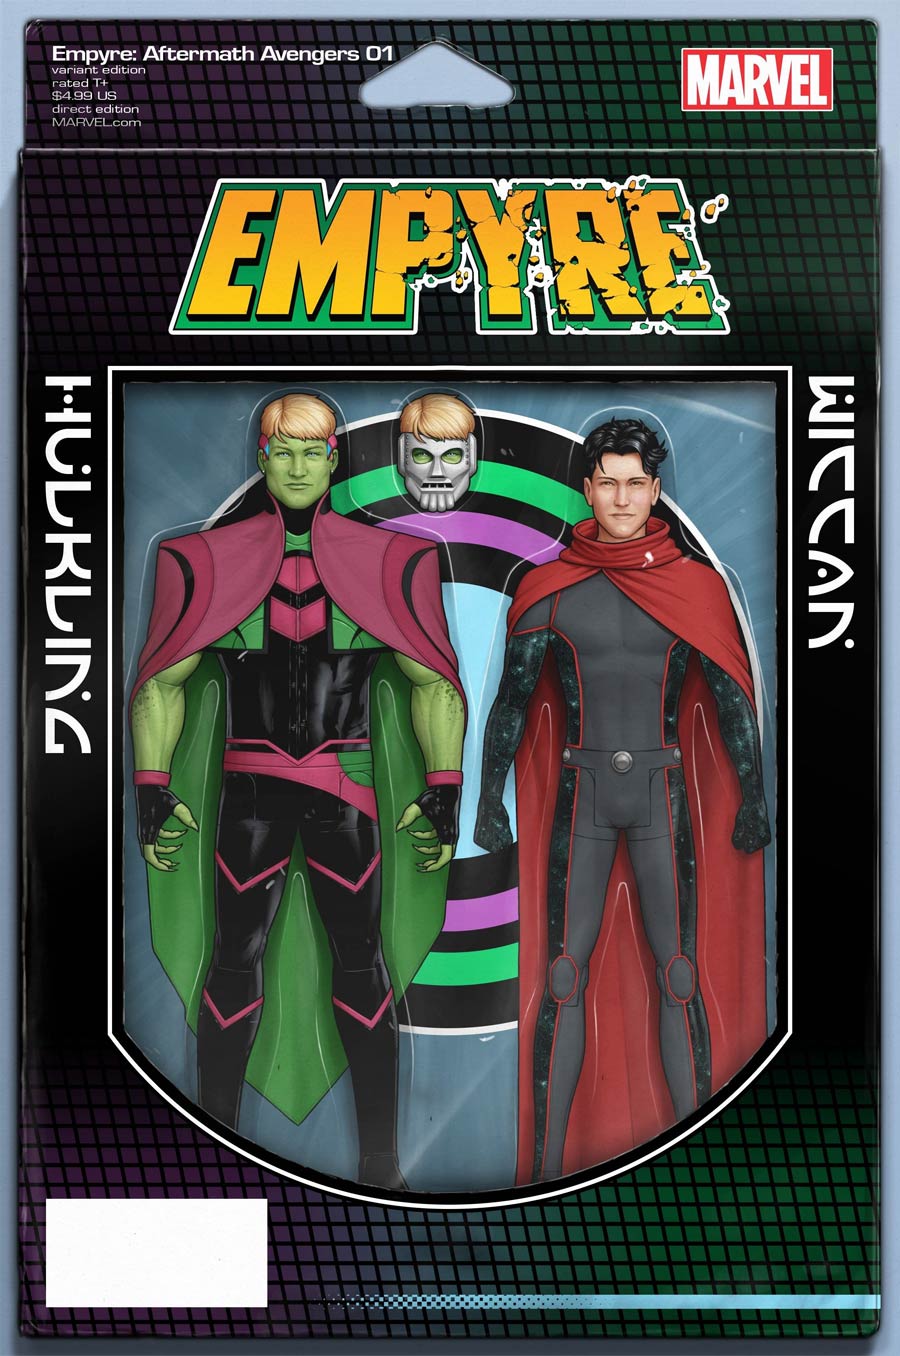 Empyre Aftermath Avengers One Shot Cover D Variant John Tyler Christopher Action Figure Cover